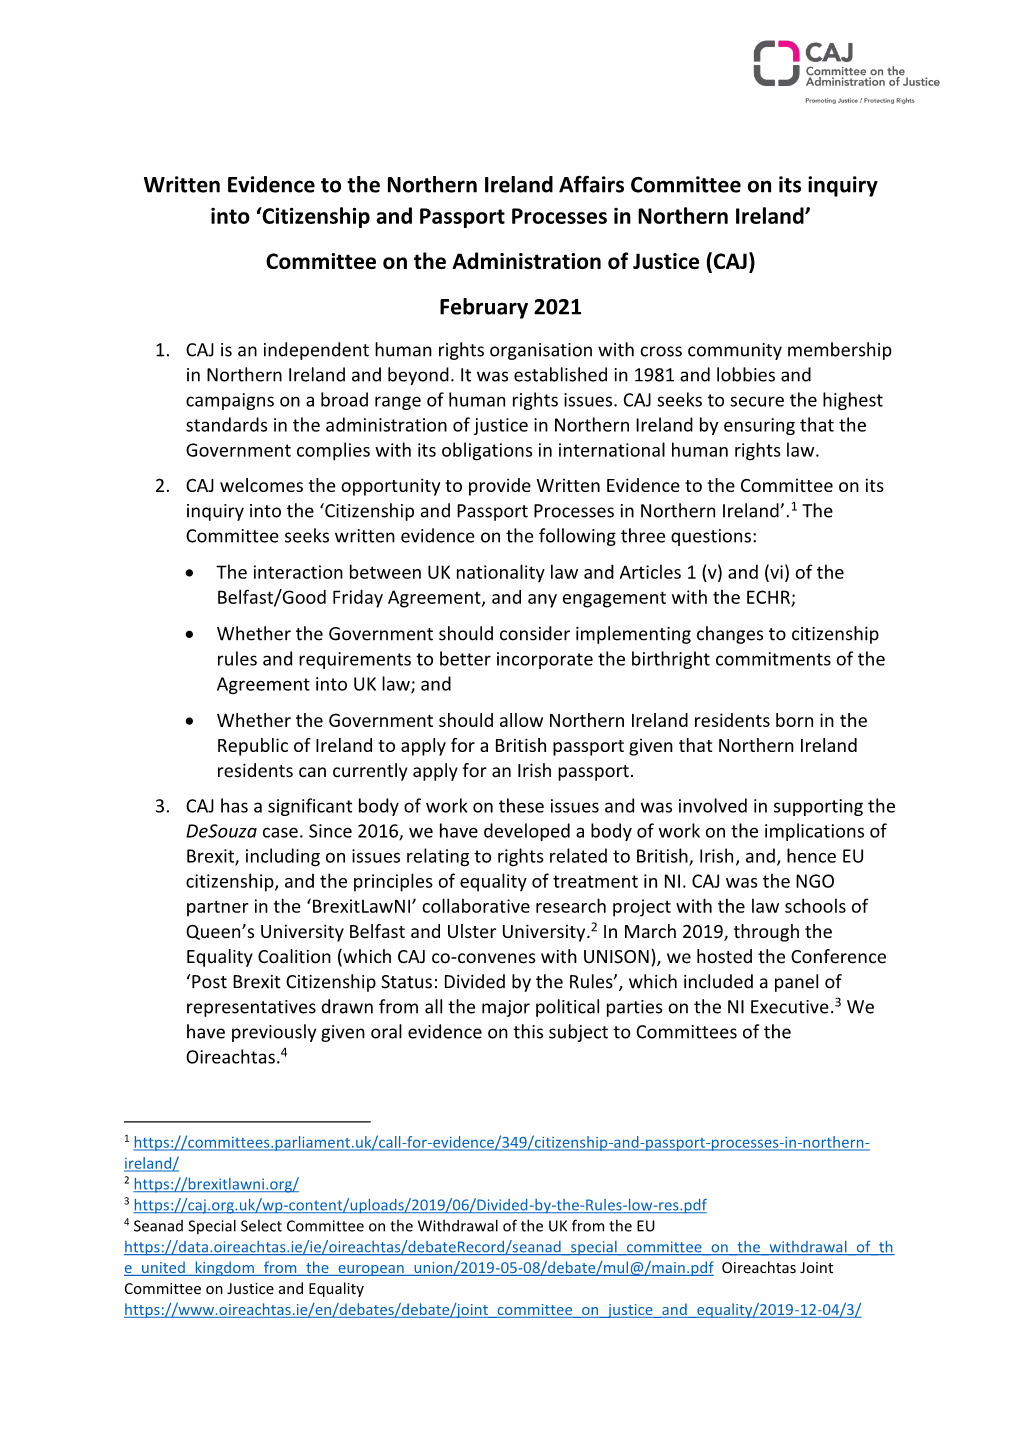 Citizenship and Passport Processes in Northern Ireland’ Committee on the Administration of Justice (CAJ) February 2021 1